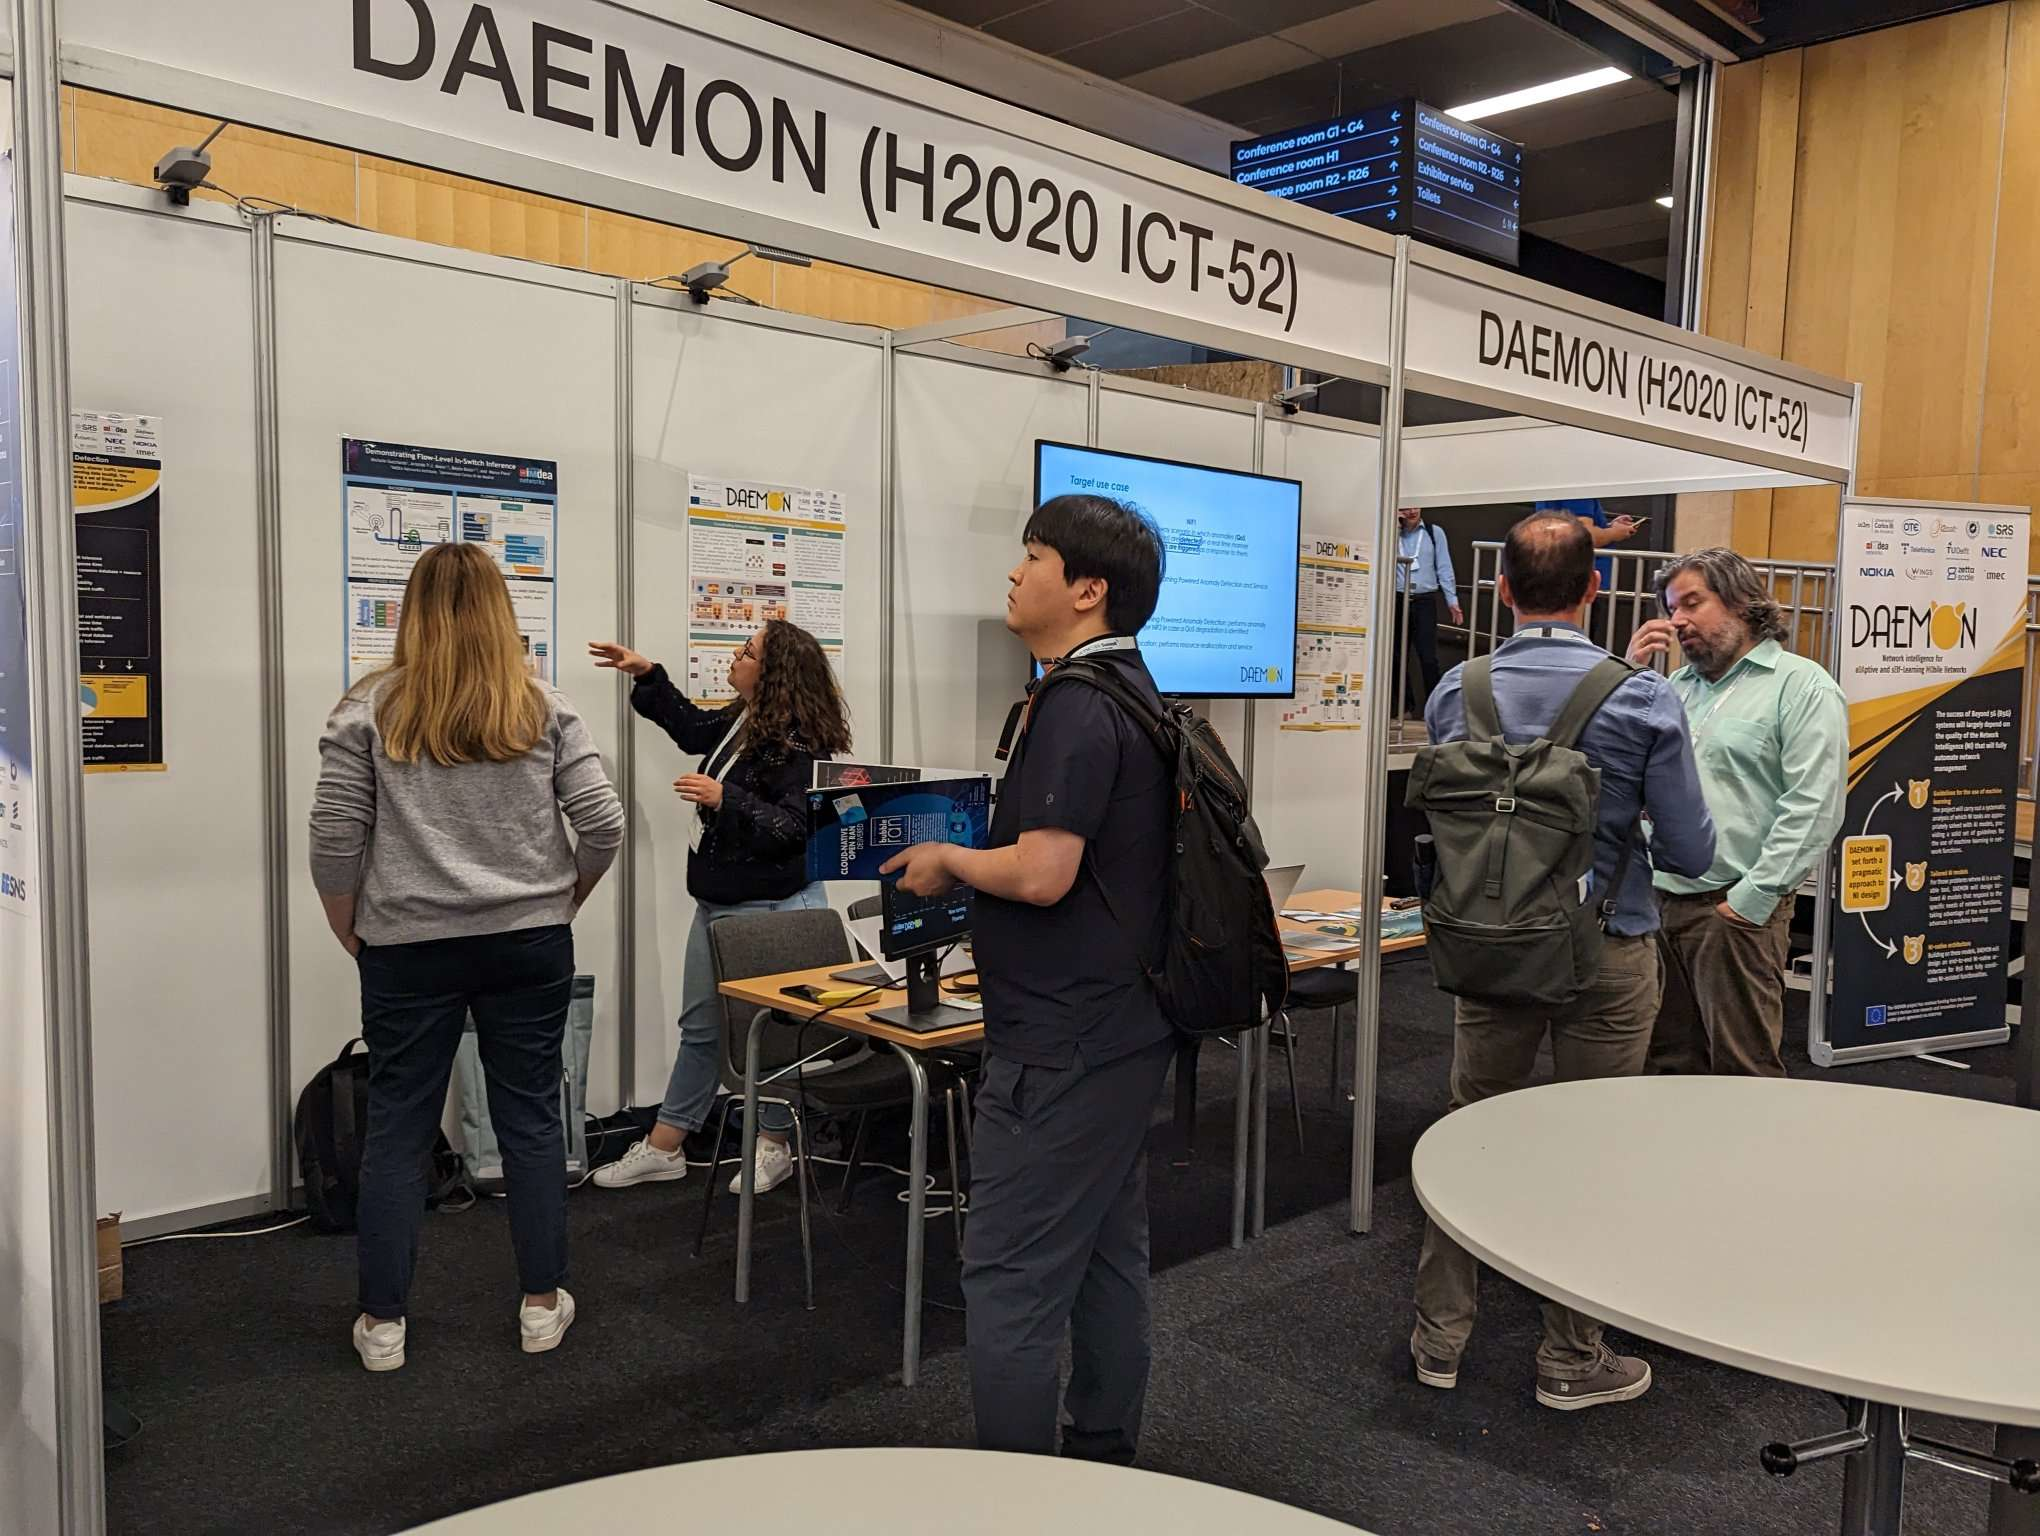 NEW @h2020daemon booth in the European Conference on Networks and Communications #EUCNC 23 in Gothenburg, Sweden #h2020daemon #H2020 @EU_H2020 @5GPPP